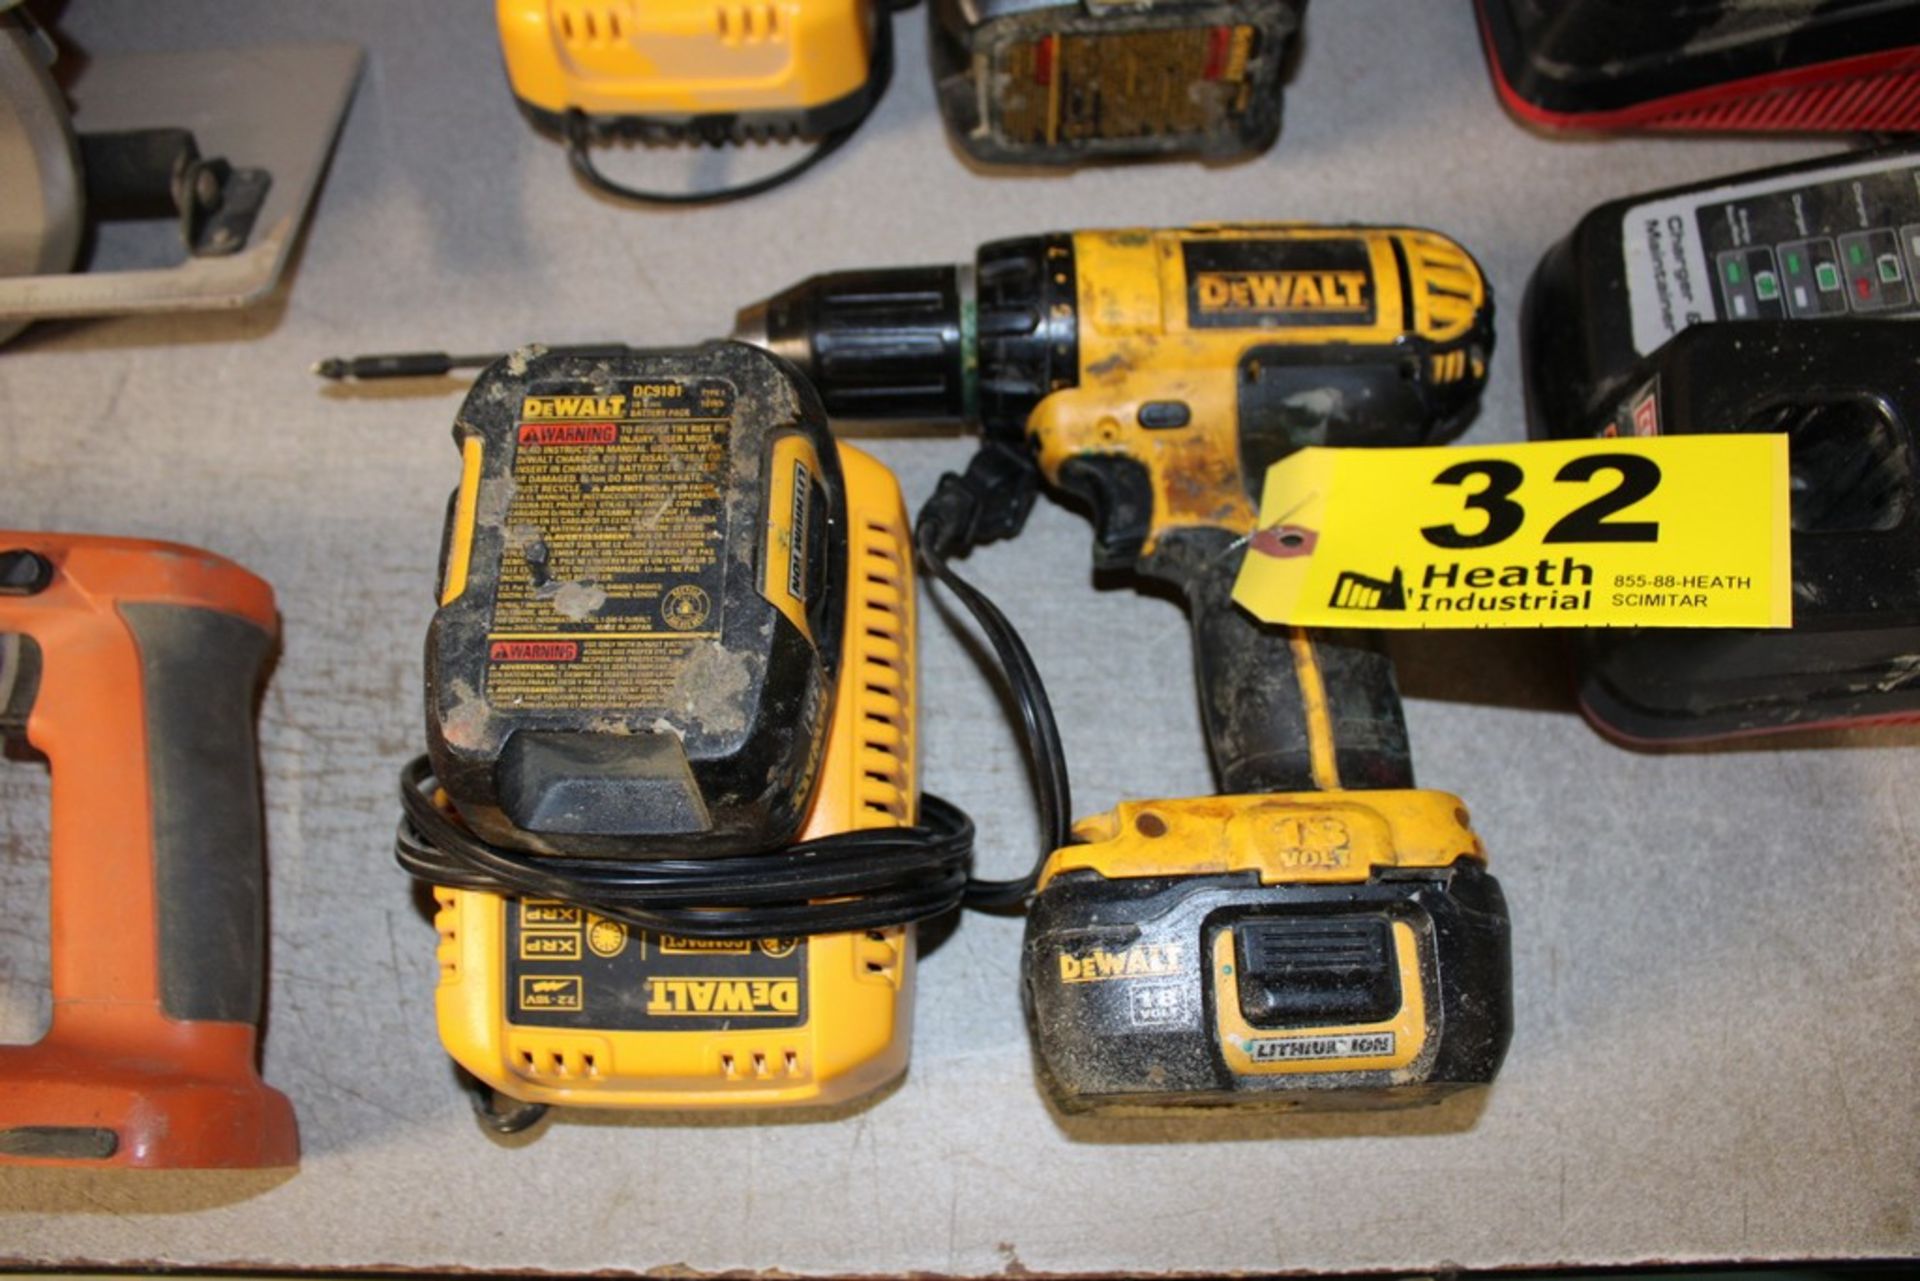 DEWALT MODEL DCD760 1/2" CORDLESS DRILL DRIVER WITH (2) BATTERIES, CHARGER